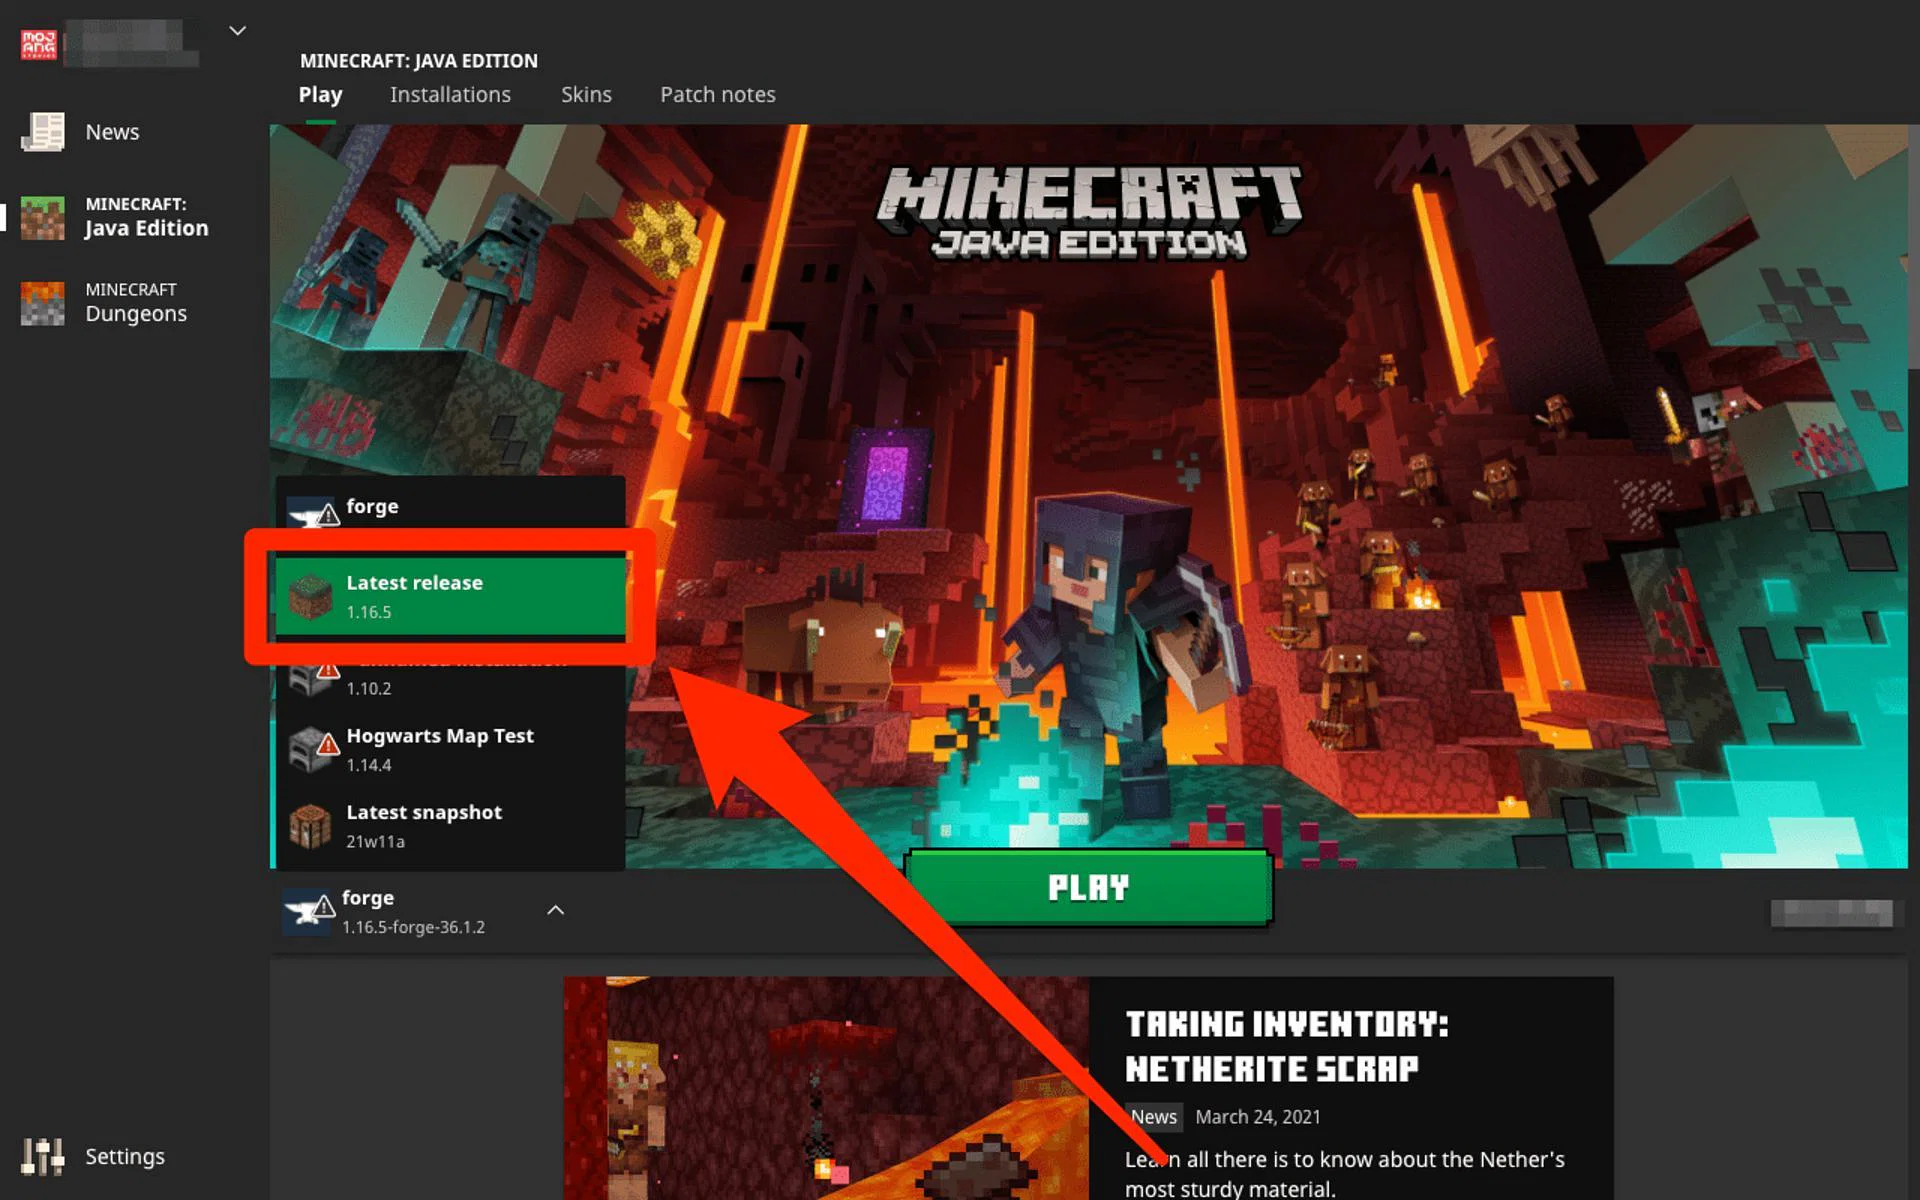 Update Statement is Valid About Features and Stories in Minecraft Launcher